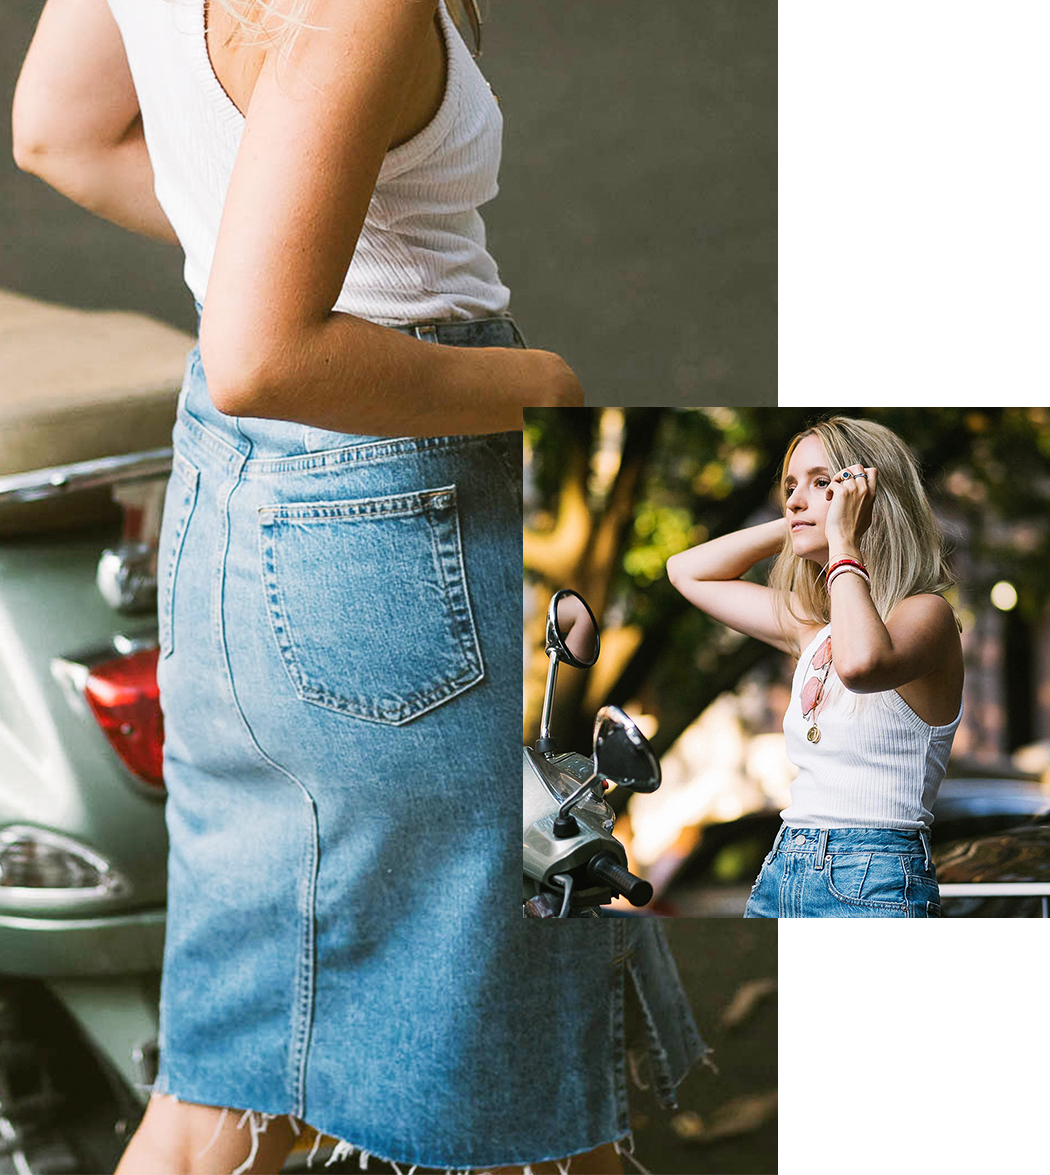 Groeneveld points out that this vibe doesn’t have to feel grungy. She loves a polished yet sporty spin on the ’90s vibe and tells us a classic midi denim skirt is a must-have. Her...